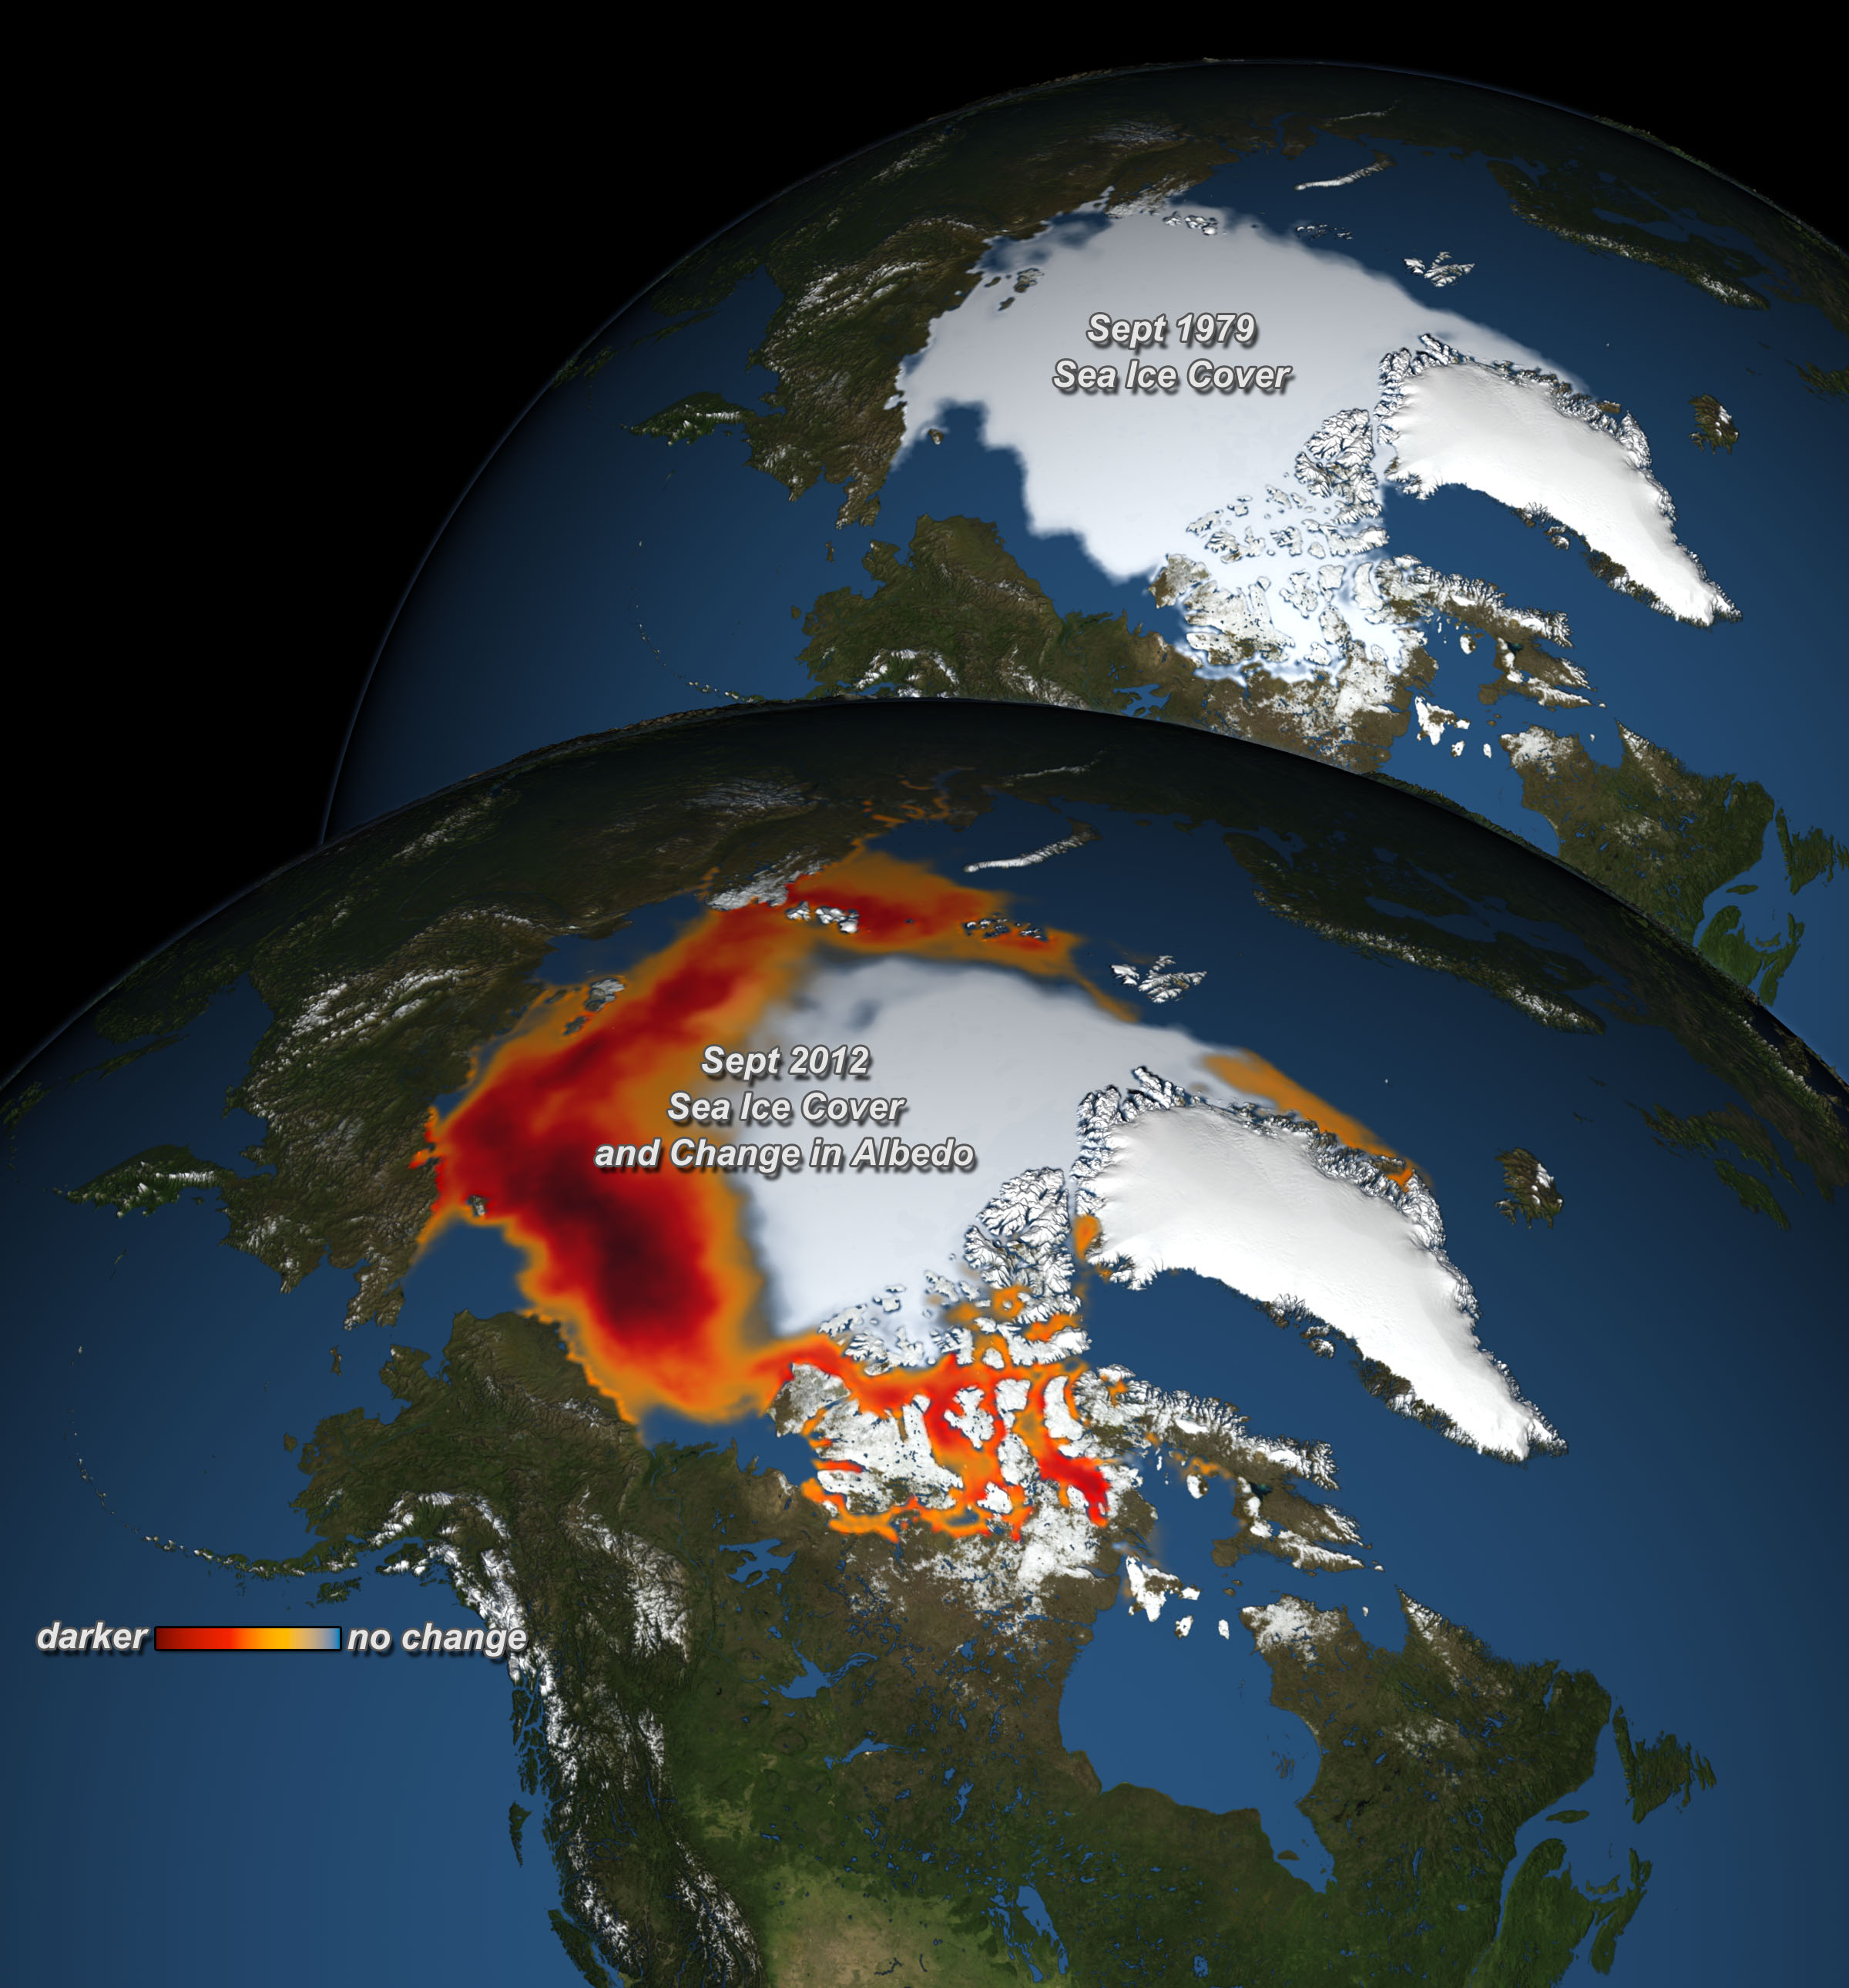 Print resolution still:  top globe shows 1979 September sea ice cover; bottom globe shows 2012 September sea ice cover with albedo change overlaid using a red color bar.  Versions are provided with and without labels.